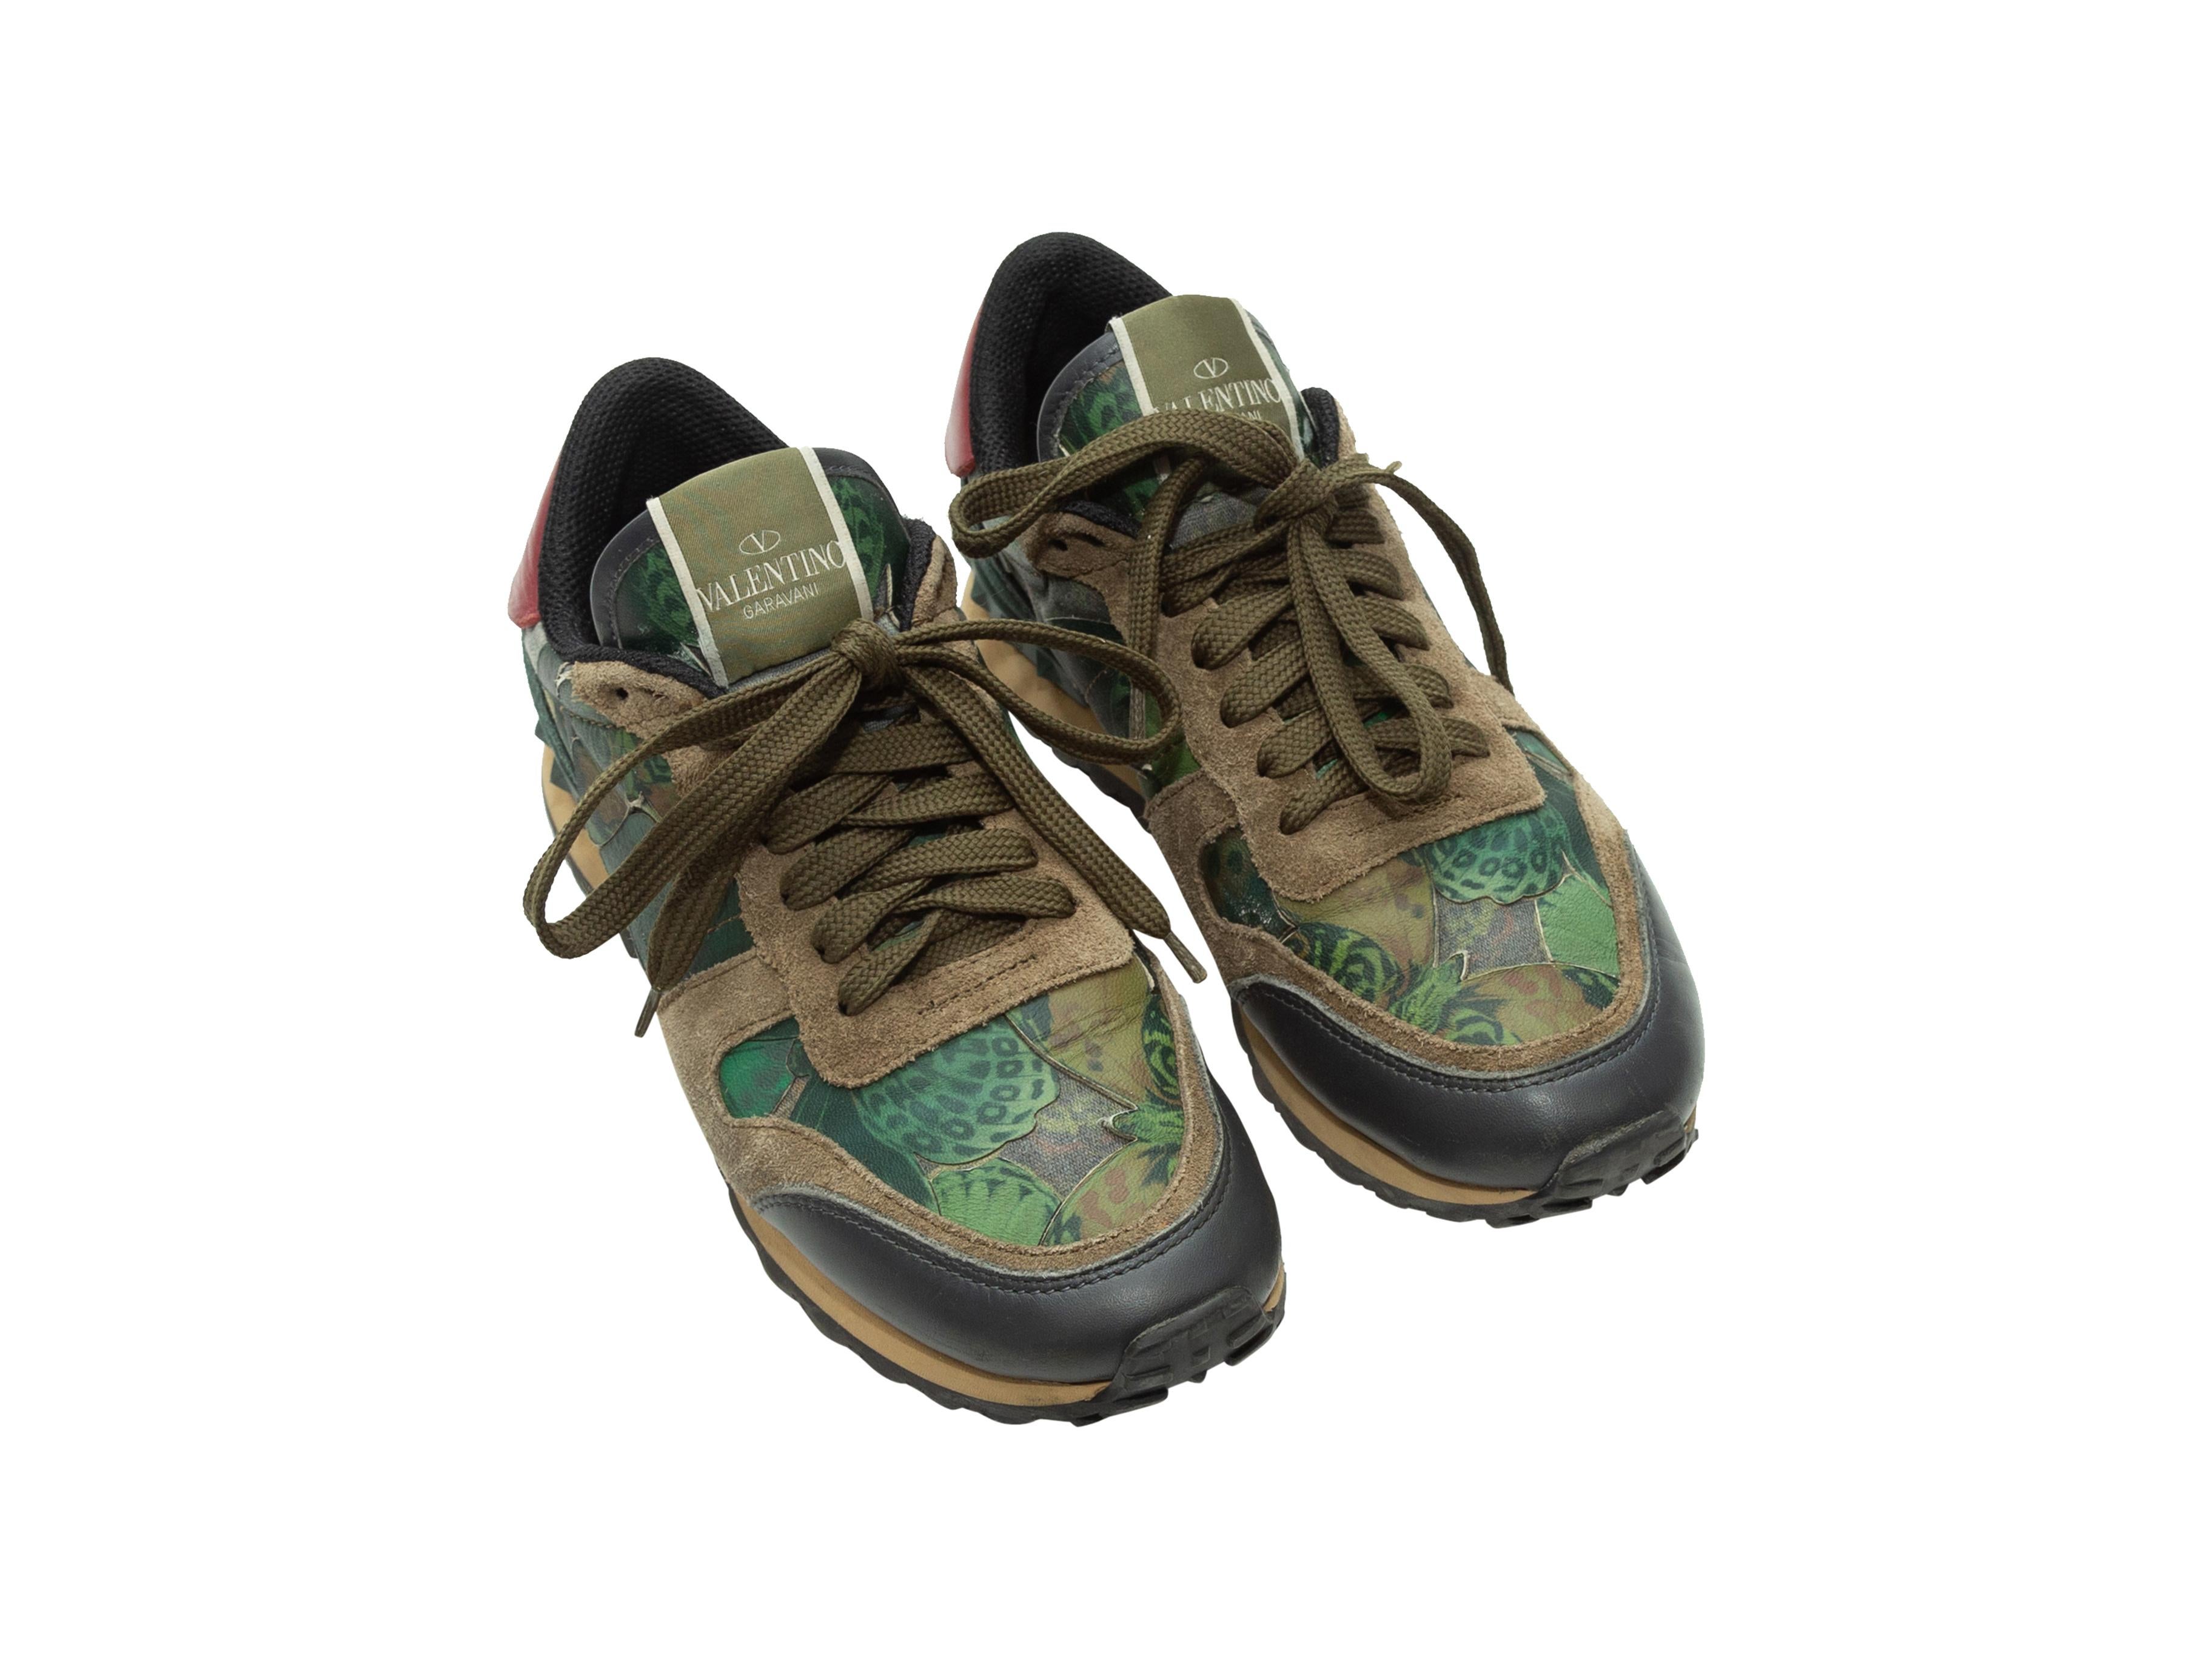 Product details: Olive green suede and multicolor Camubutterfly low-top sneakers by Valentino. Red leather trim at backs. Rockstud trim at heels. Lace-up tie closures at tops. 1